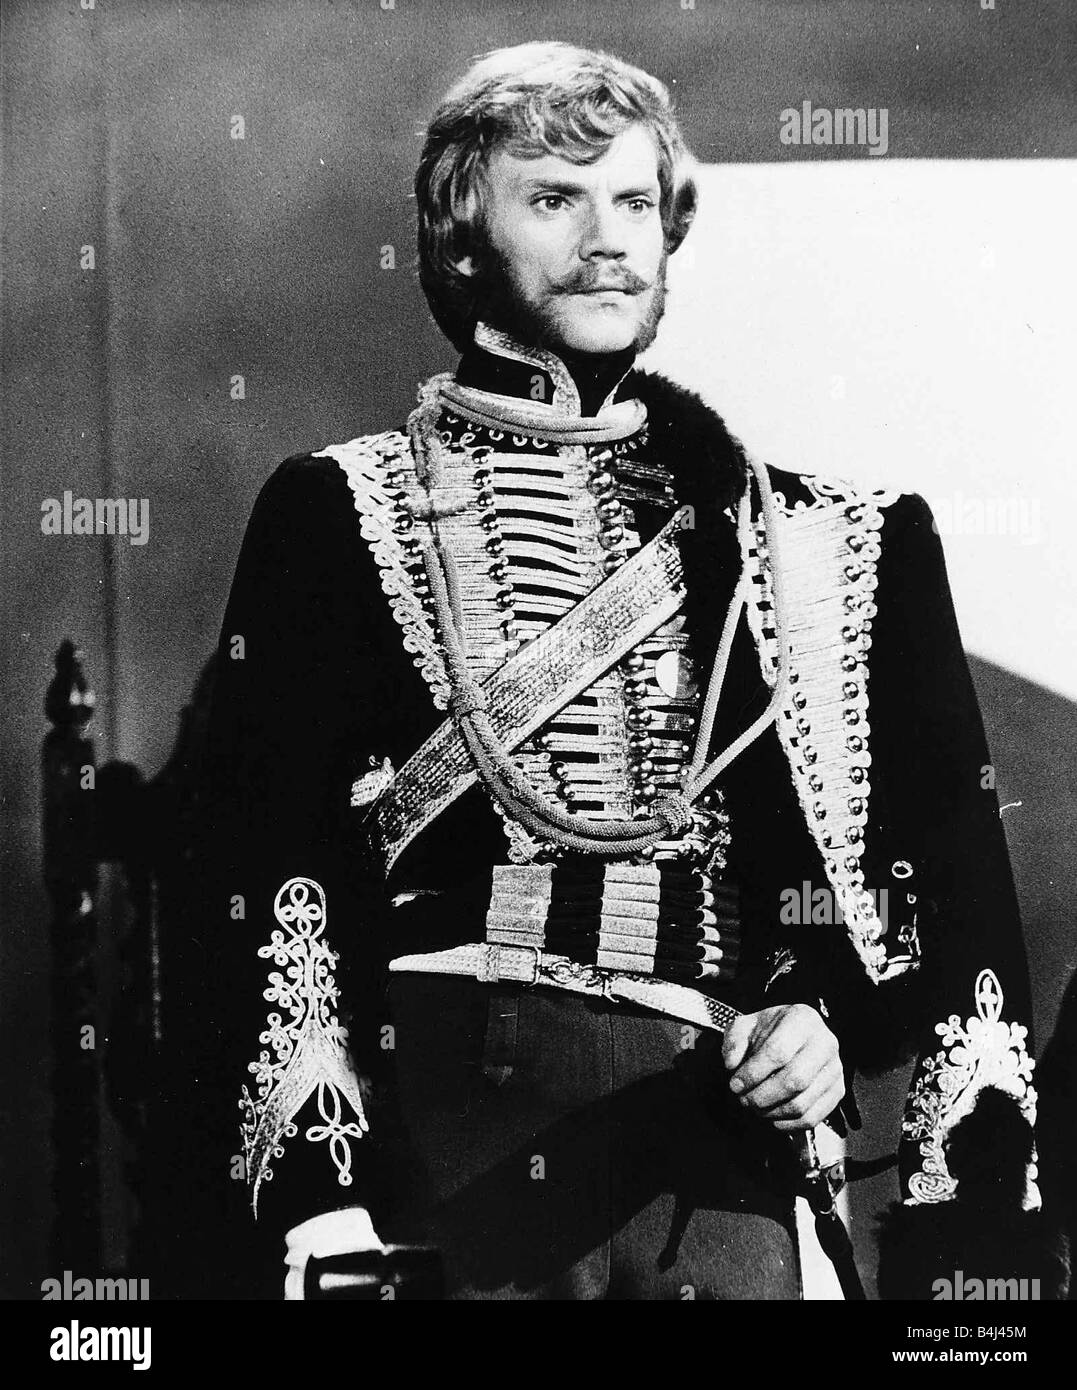 Malcolm McDowell Actor stars in the film Royal Flash who plays a cad dbase msi Stock Photo